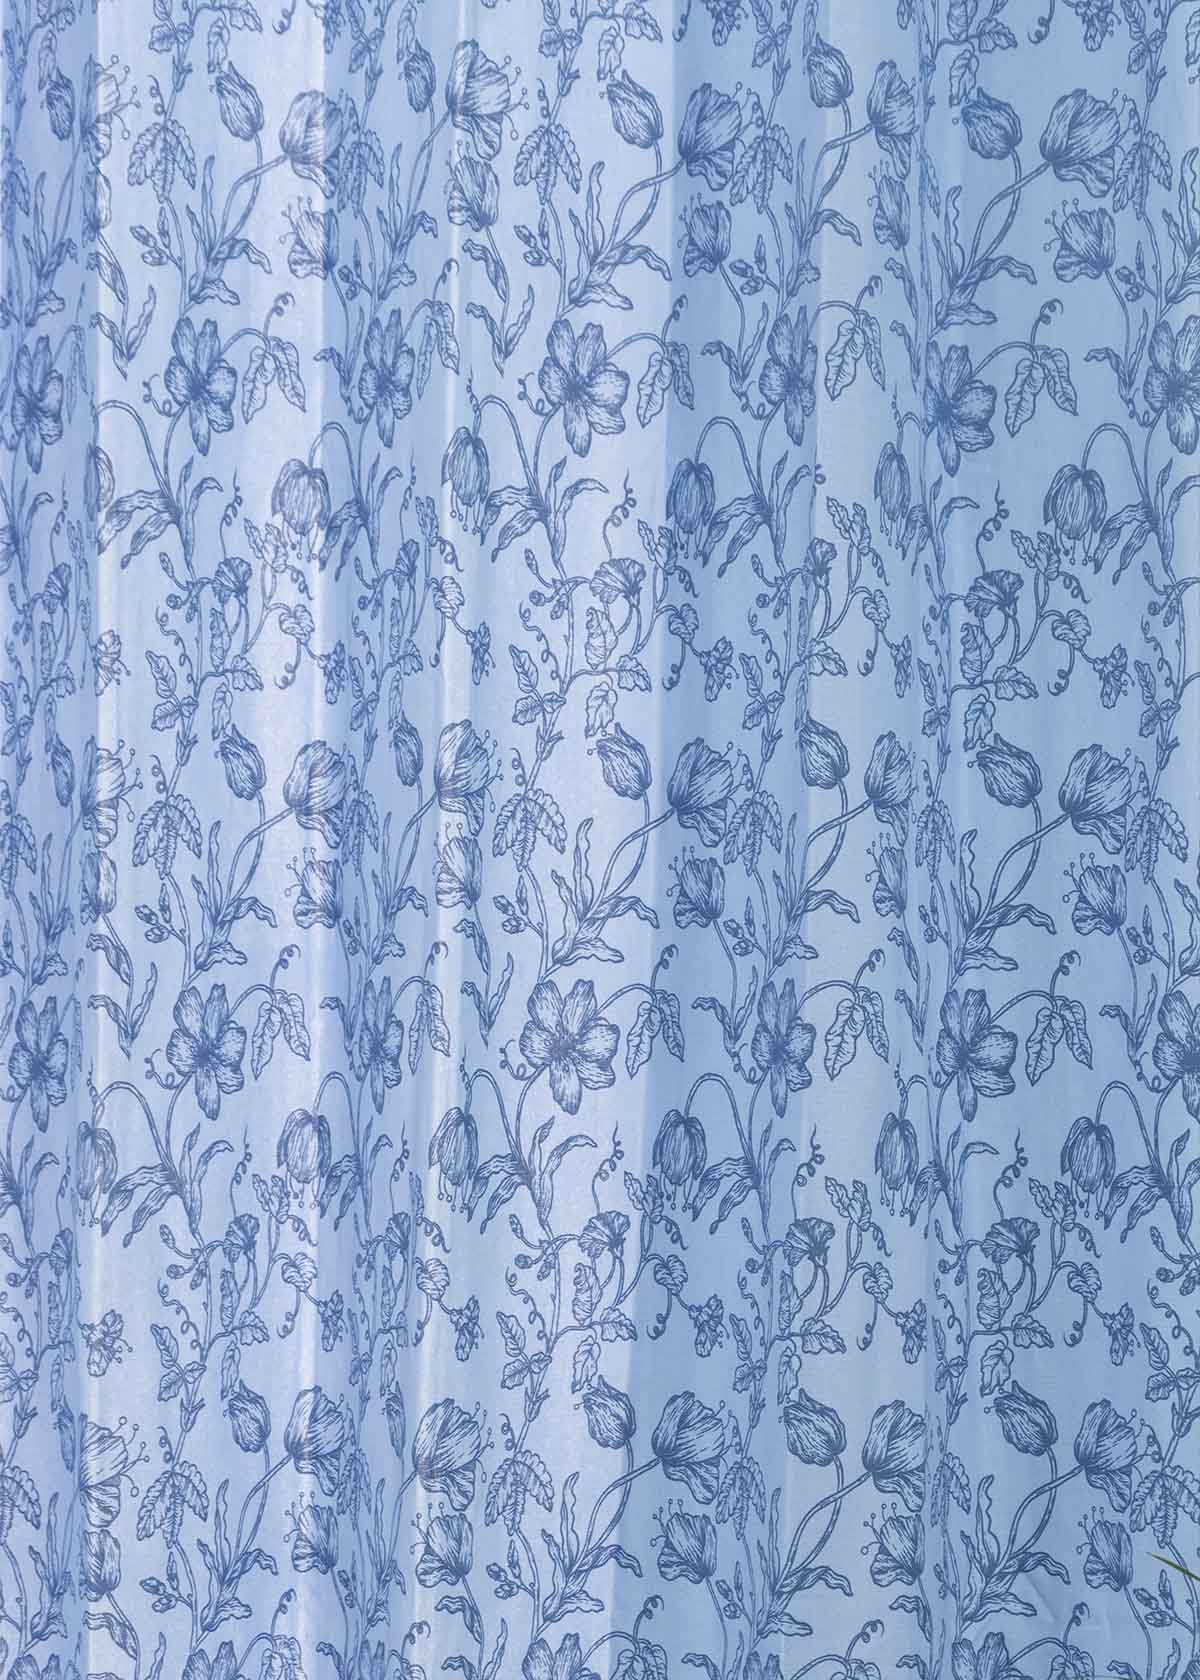 French Farmhouse printed cotton Fabric - Blue